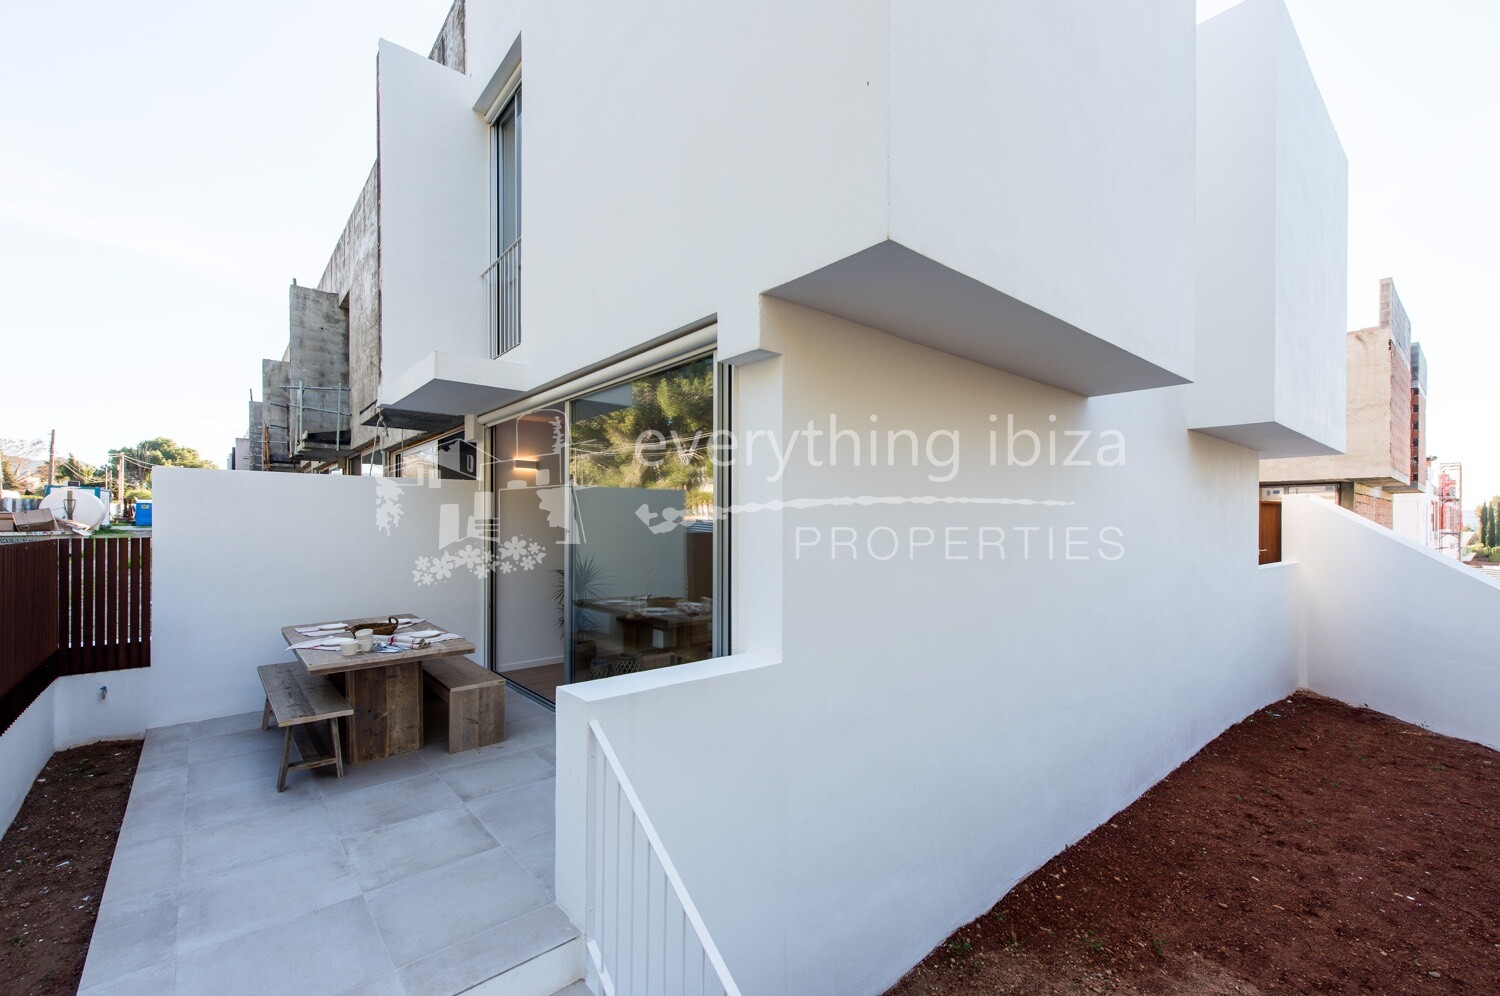 New Build Luxury Modern Townhouses, ref. 1382, for sale in Ibiza by everything ibiza Properties